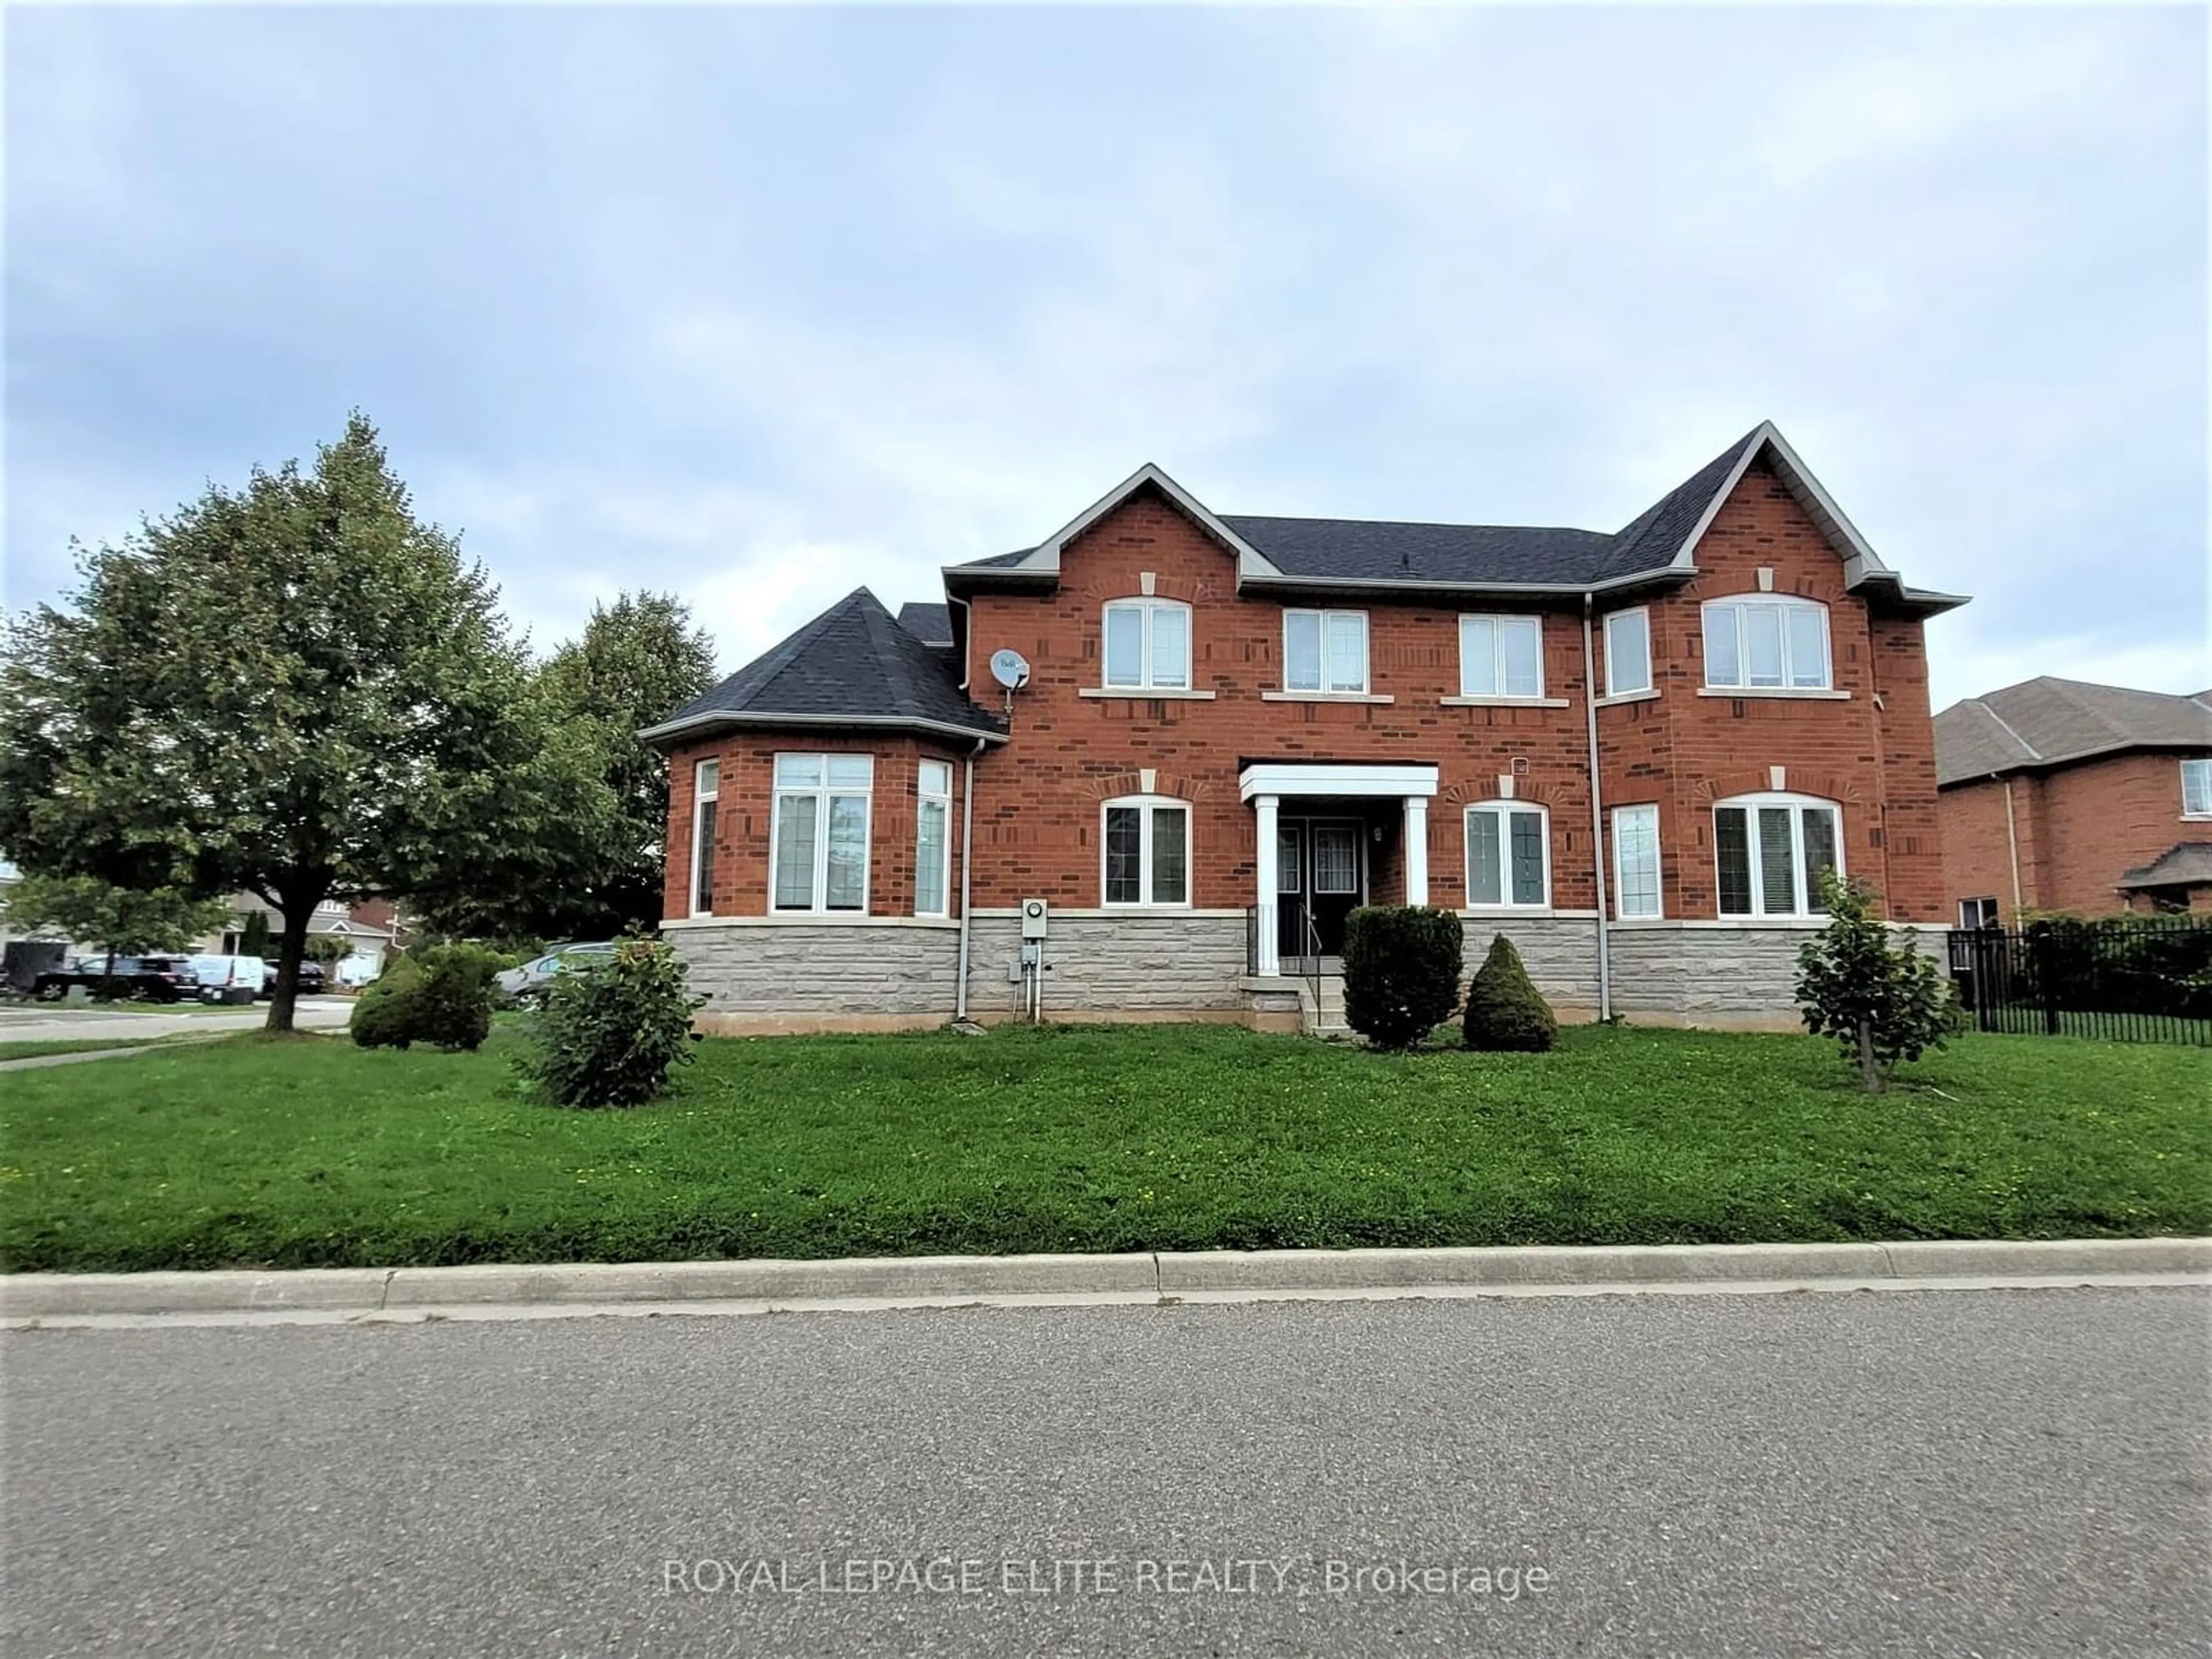 Home with brick exterior material for 1278 Sandpiper Rd, Oakville Ontario L6M 3V7